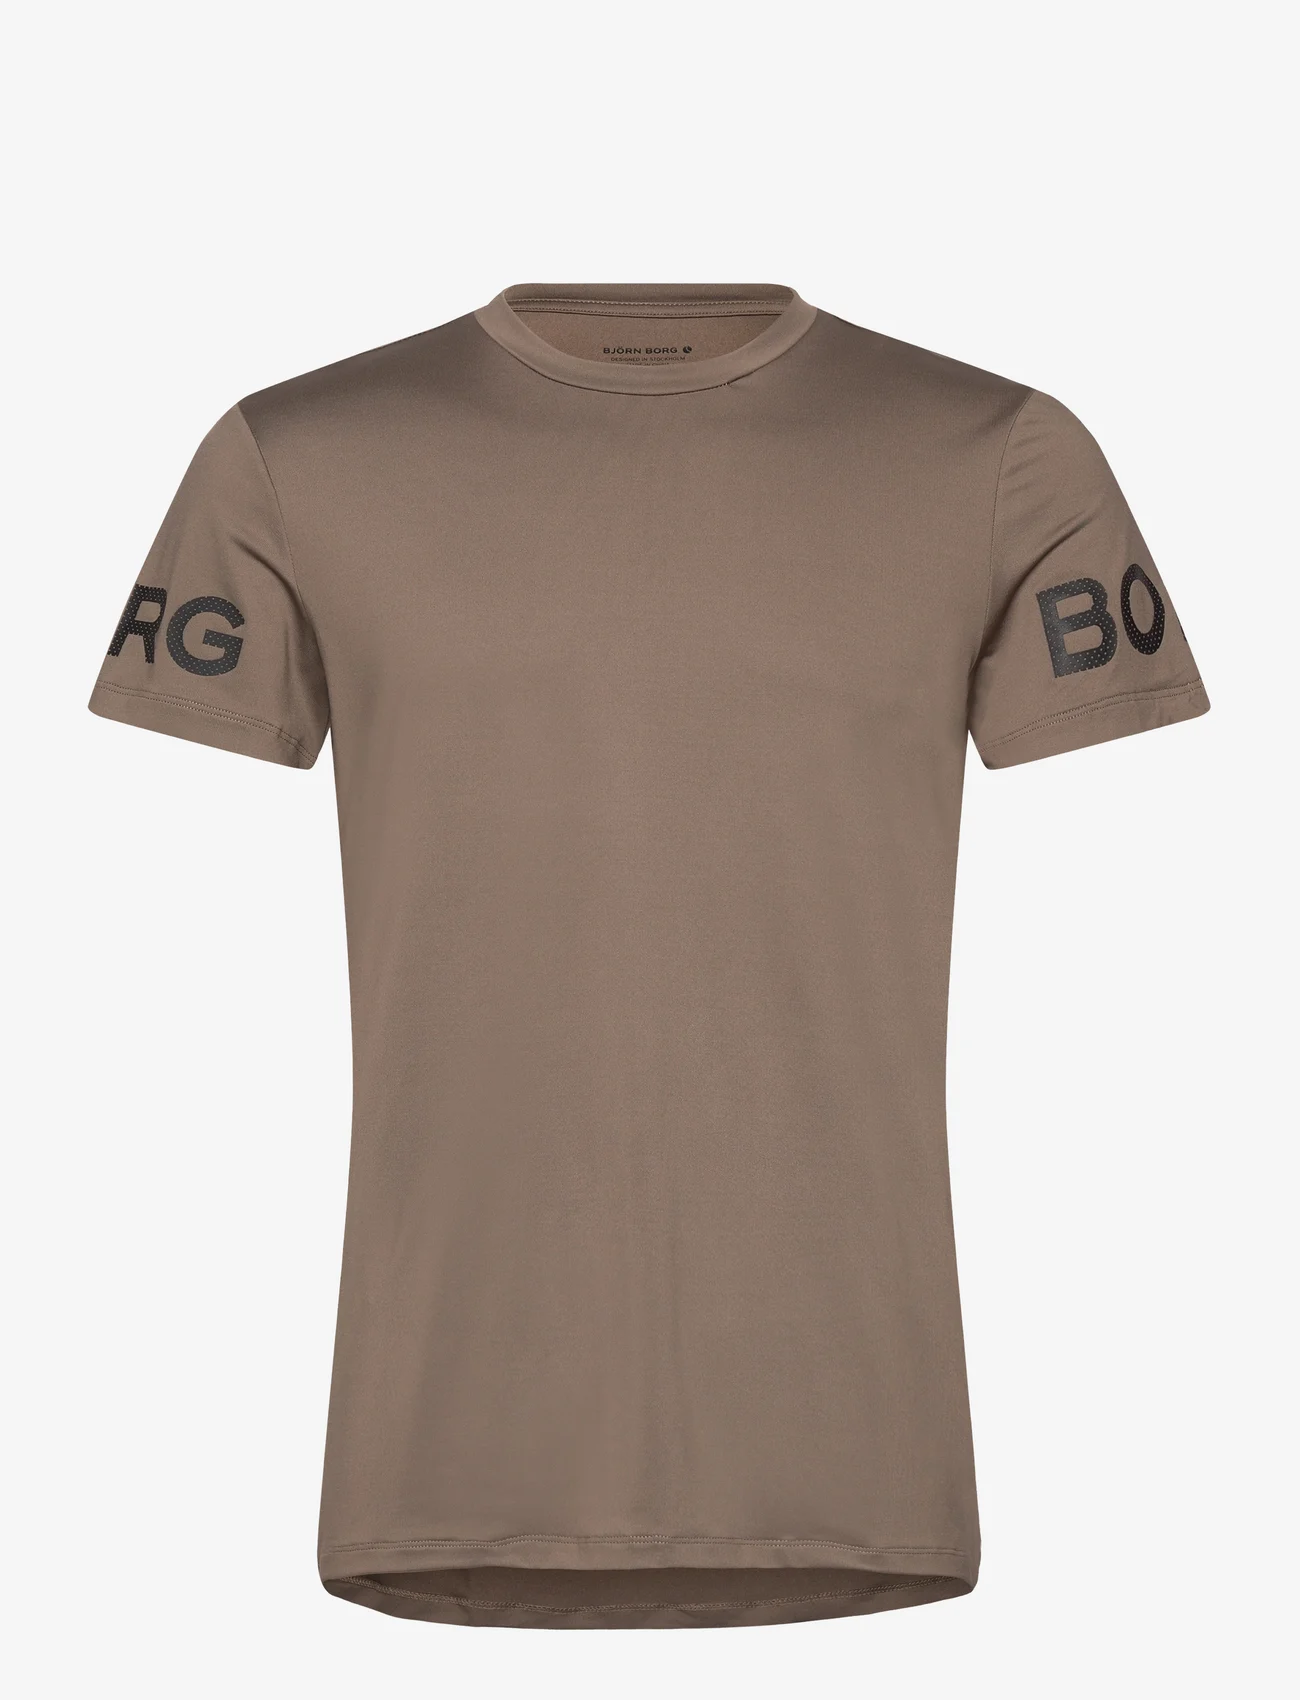 Björn Borg - BORG T-SHIRT - lowest prices - bungee cord - 0